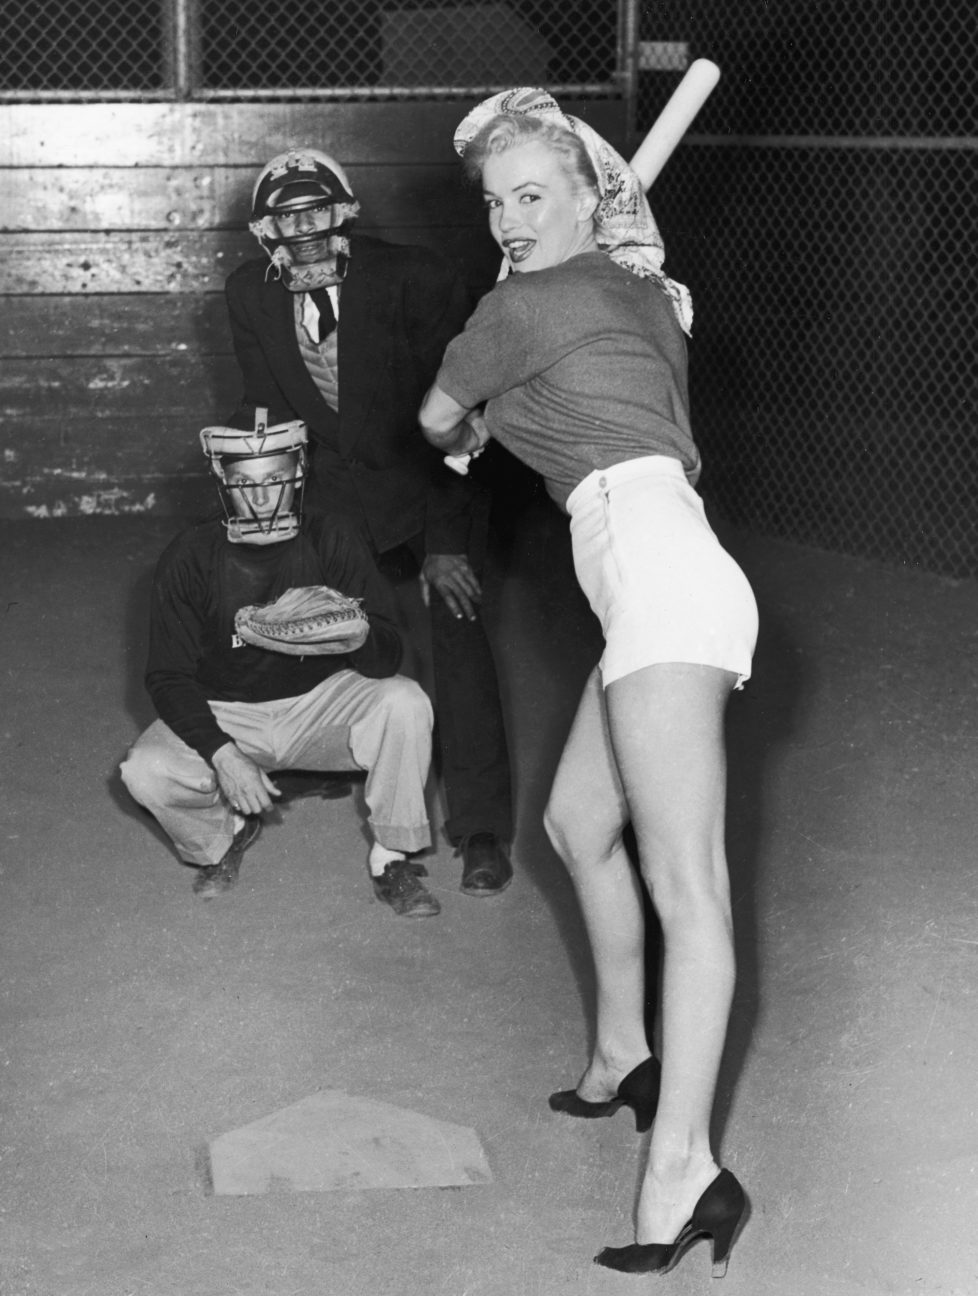 July 1952: American actor Marilyn Monroe (1926 - 1962), wearing shorts and high heels, prepares to swing a baseball bat during a 20th Century Fox Studio baseball league game. Studio employees play umpire and catcher. (Photo by Hulton Archive/Getty Images)